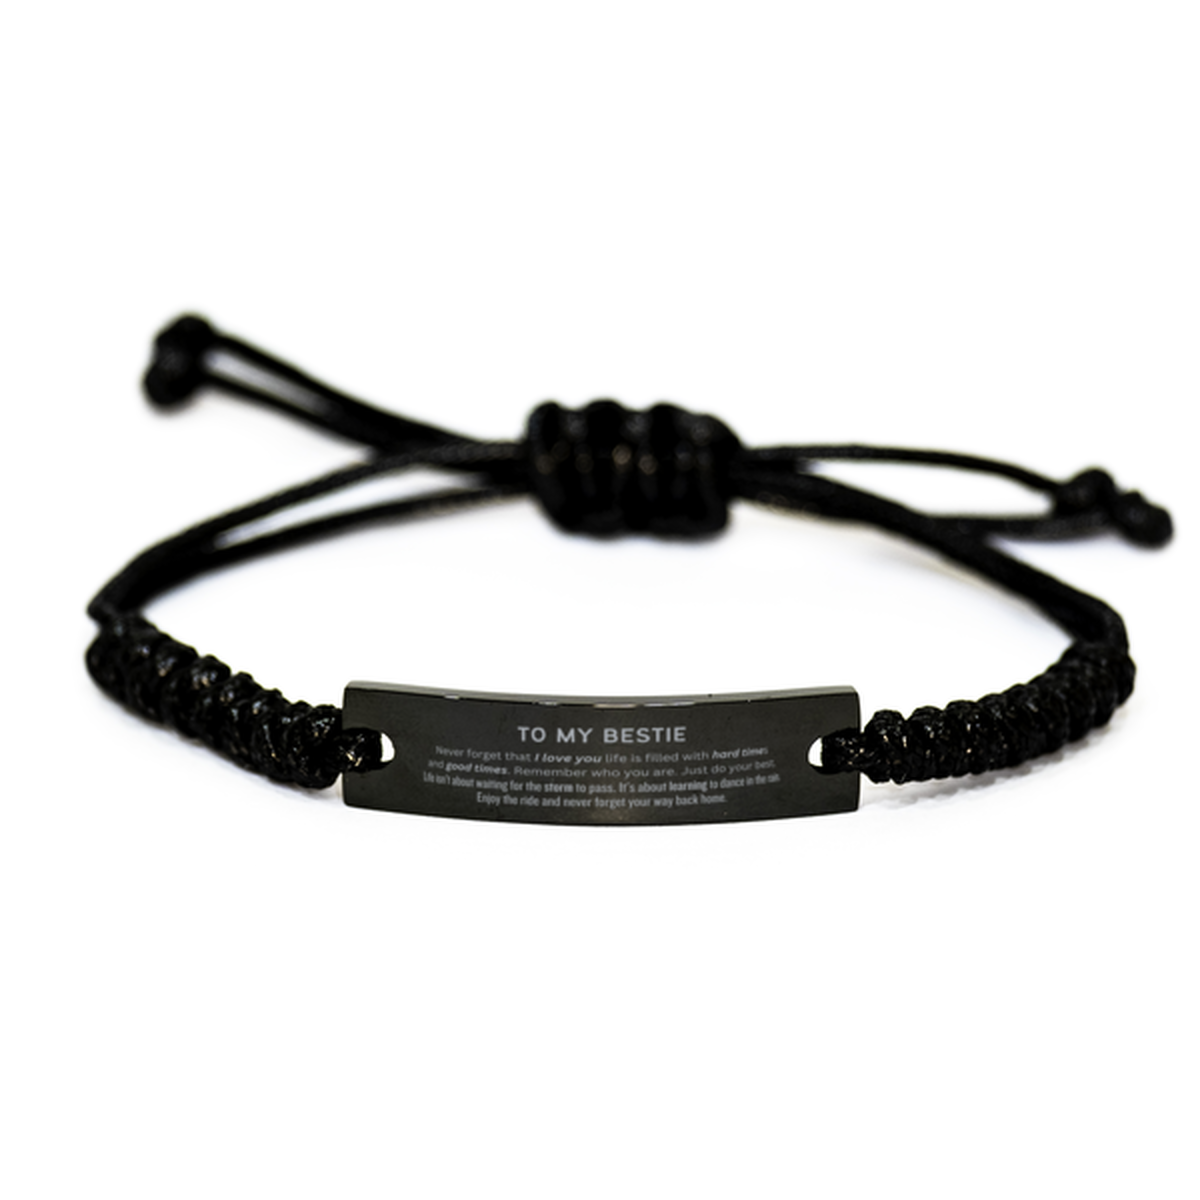 Christmas Bestie Black Rope Bracelet Gifts, To My Bestie Birthday Thank You Gifts For Bestie, Graduation Unique Gifts For Bestie To My Bestie Never forget that I love you life is filled with hard times and good times. Remember who you are. Just do your be